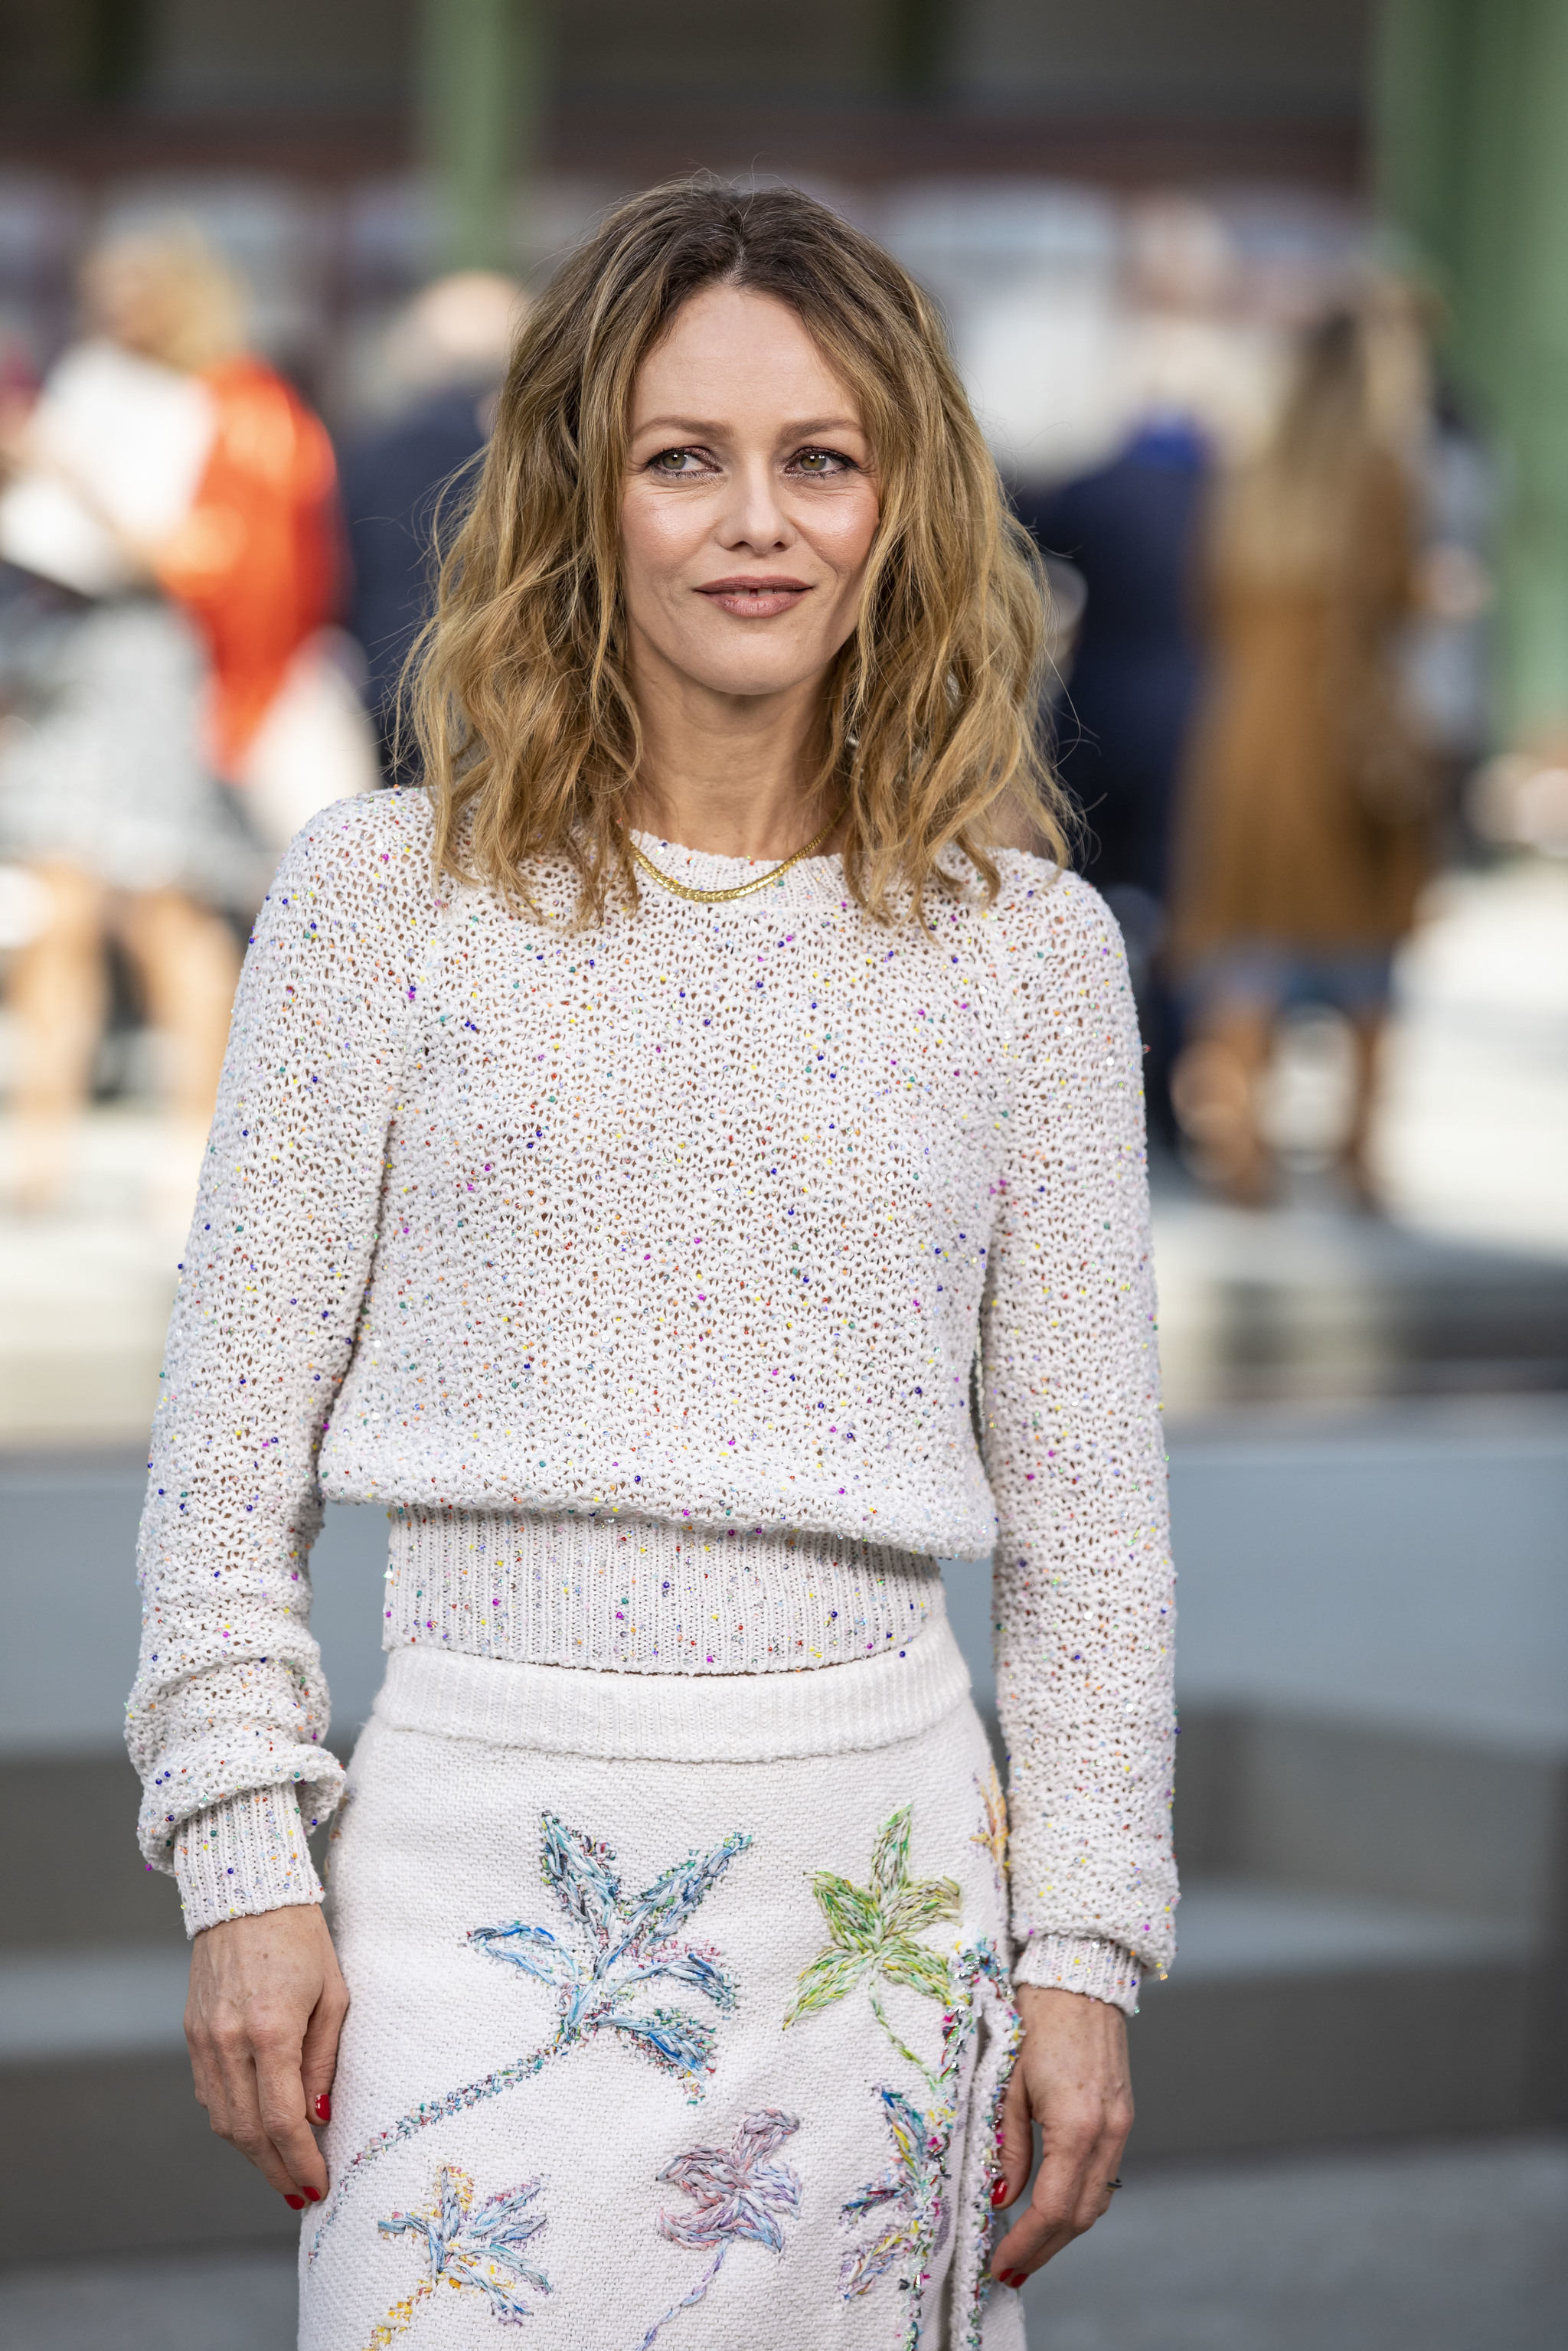 Vanessa Paradis balances the volumes of her curly hair with the airspace cut.